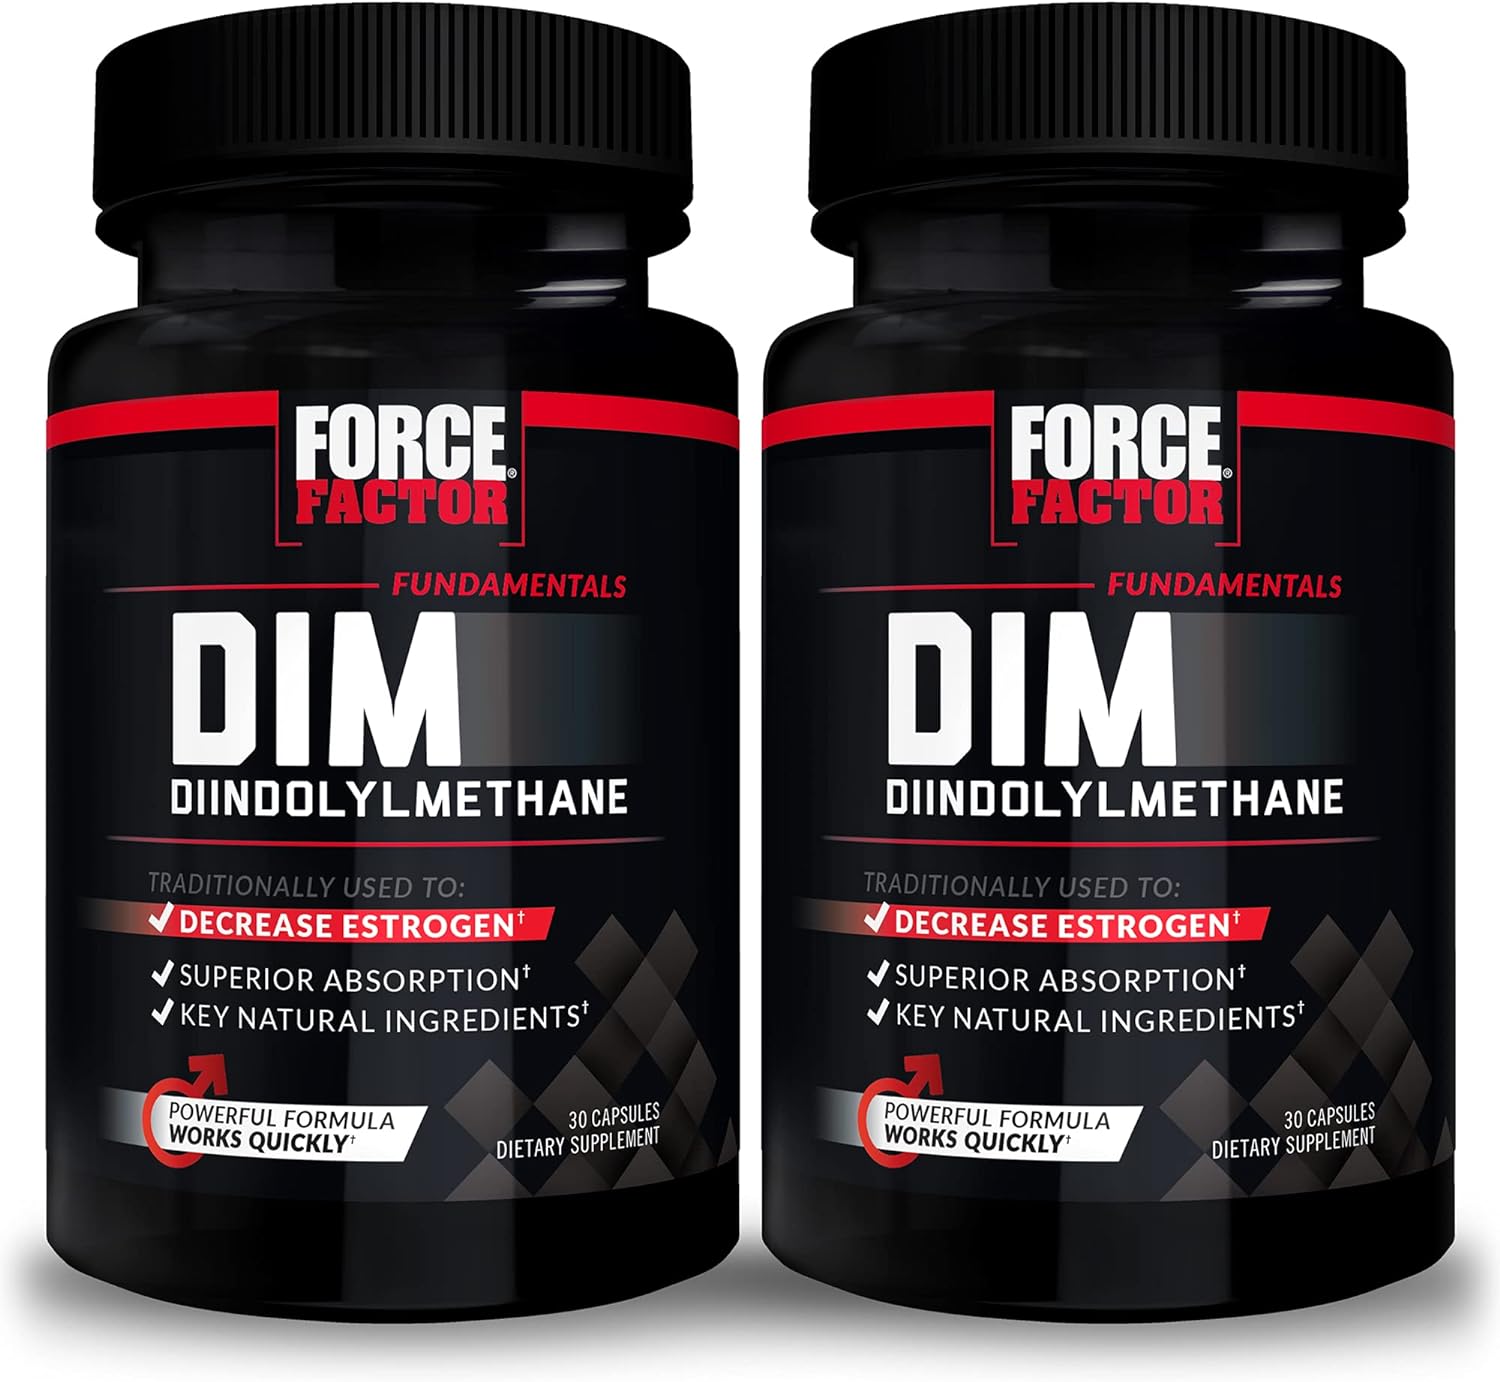 Force Factor DIM, 2-Pack, Pills to Decrease Estrogen in Men, Diindolylmethane Supplement with Key Natural Ingredients and Superior Absorption, Diindolylmethane 300mg, Works Fast, 60 Capsules